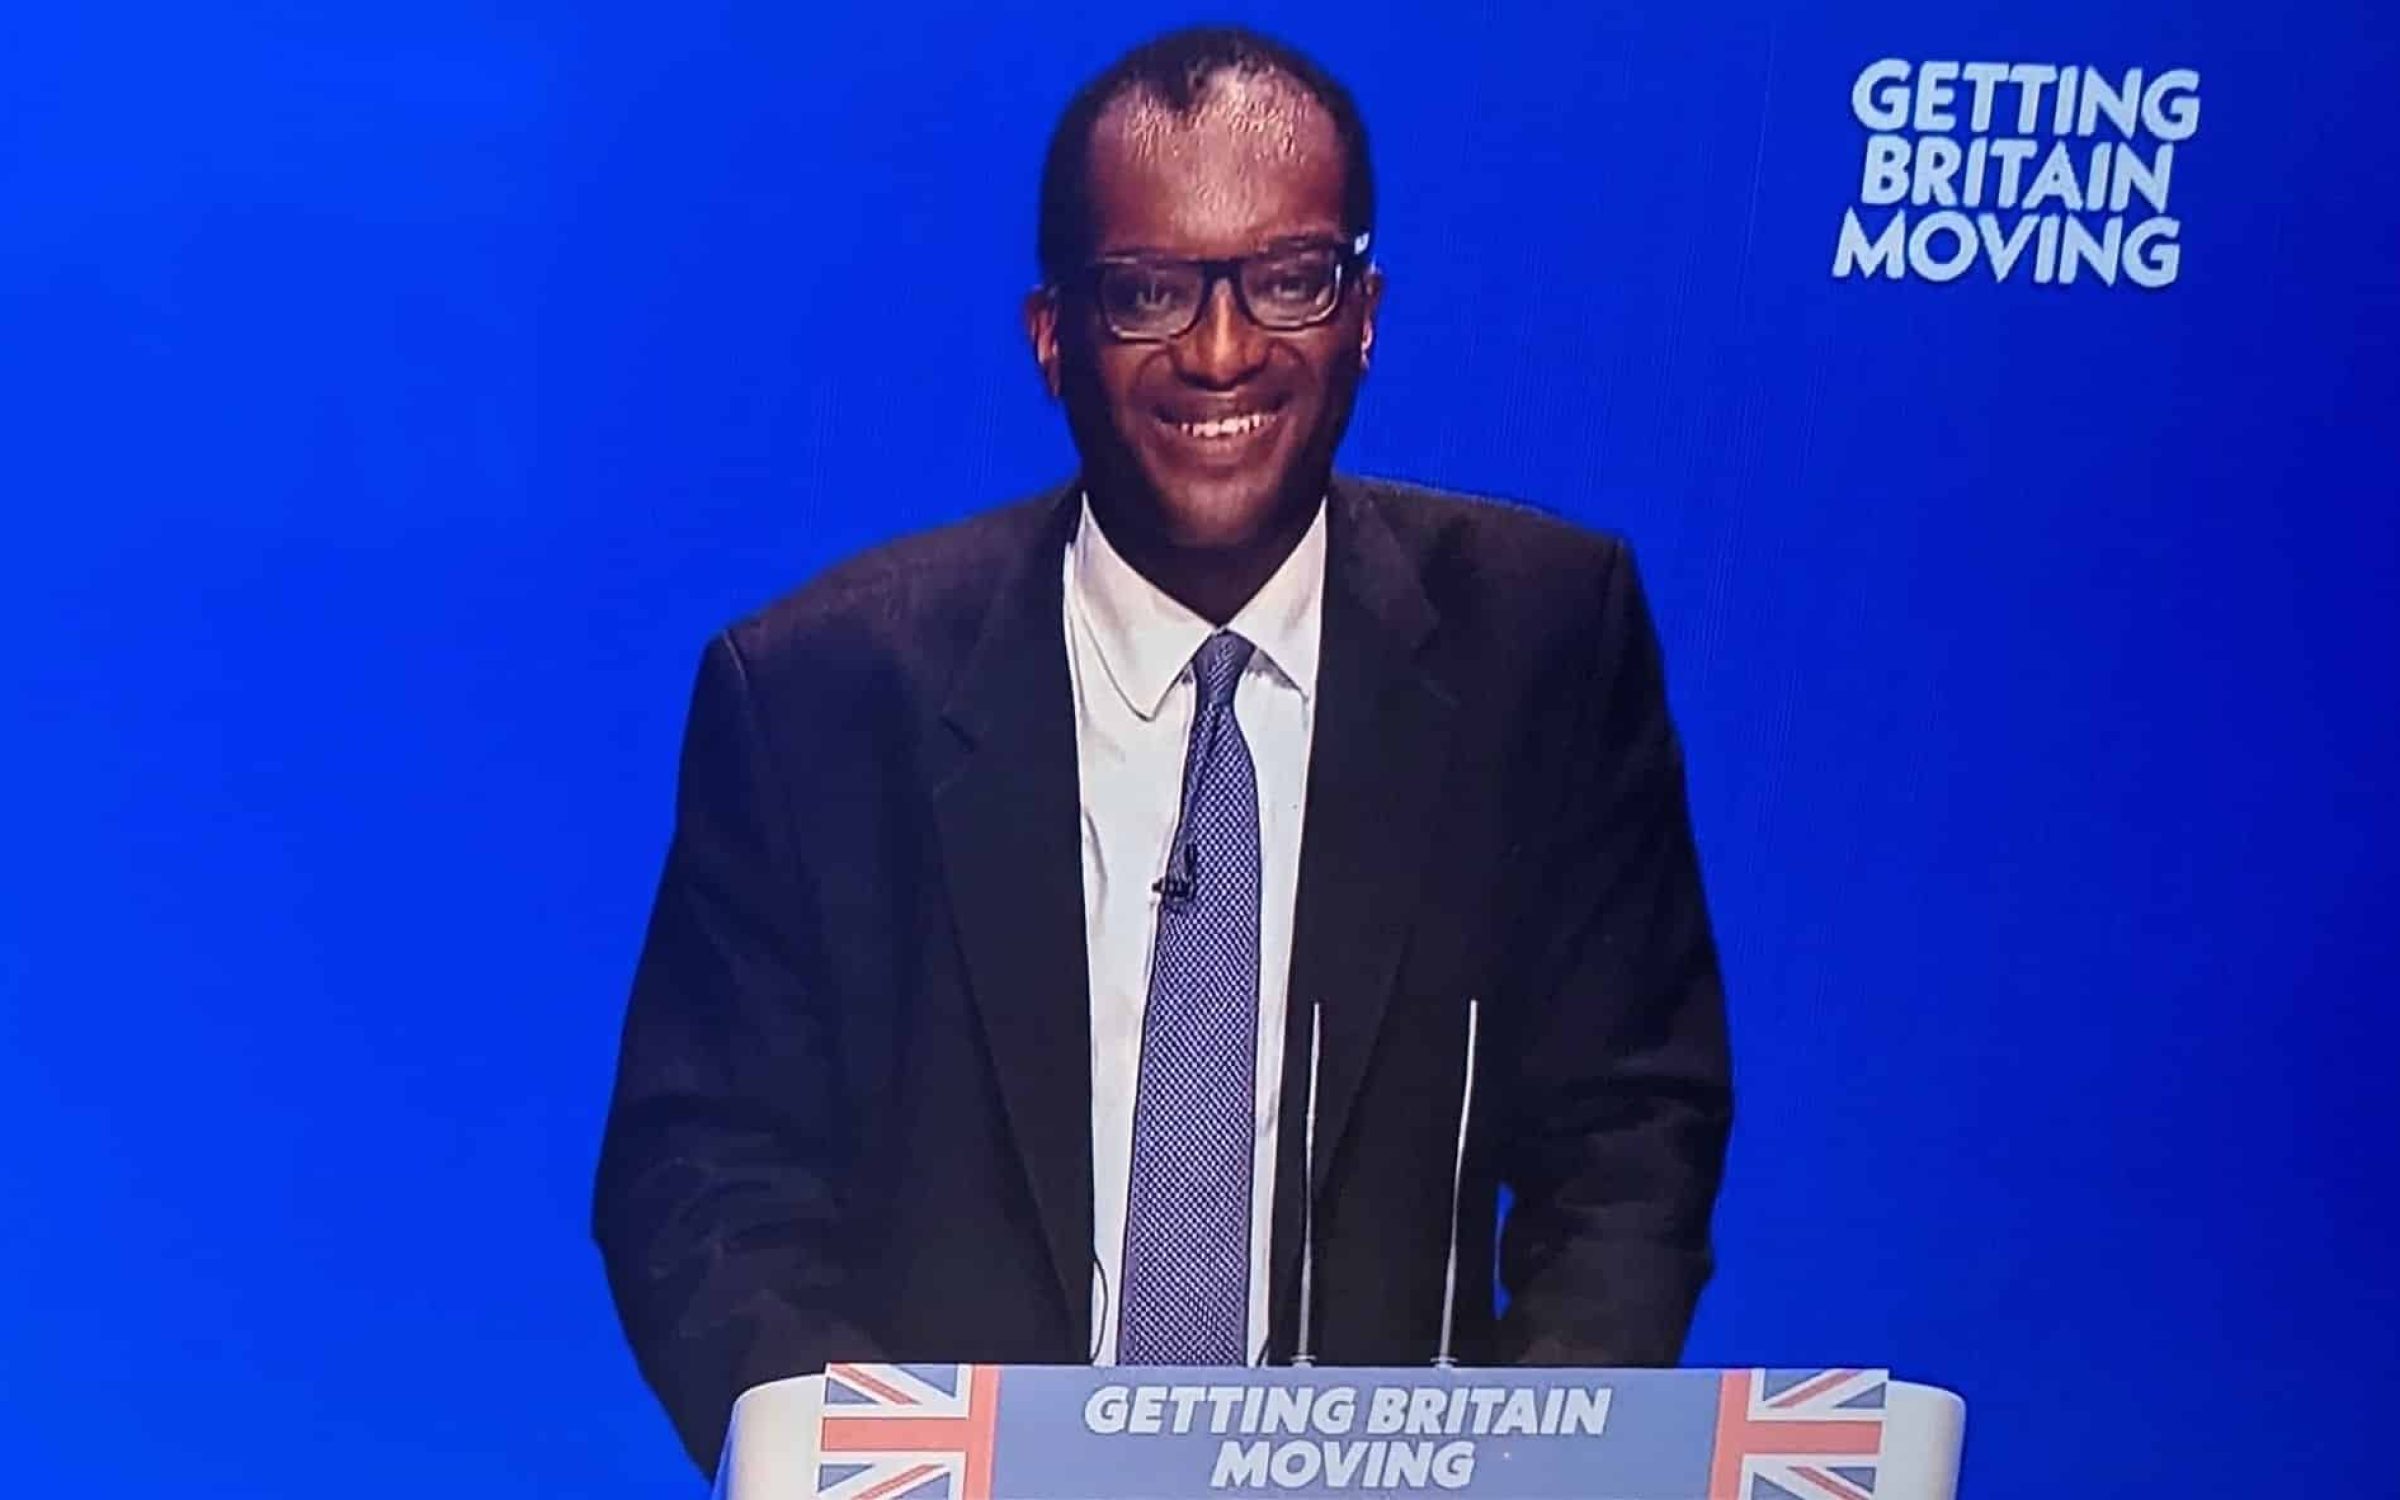 Kwasi Kwarteng's speech at 2022 Conservative party conference (via BBC)